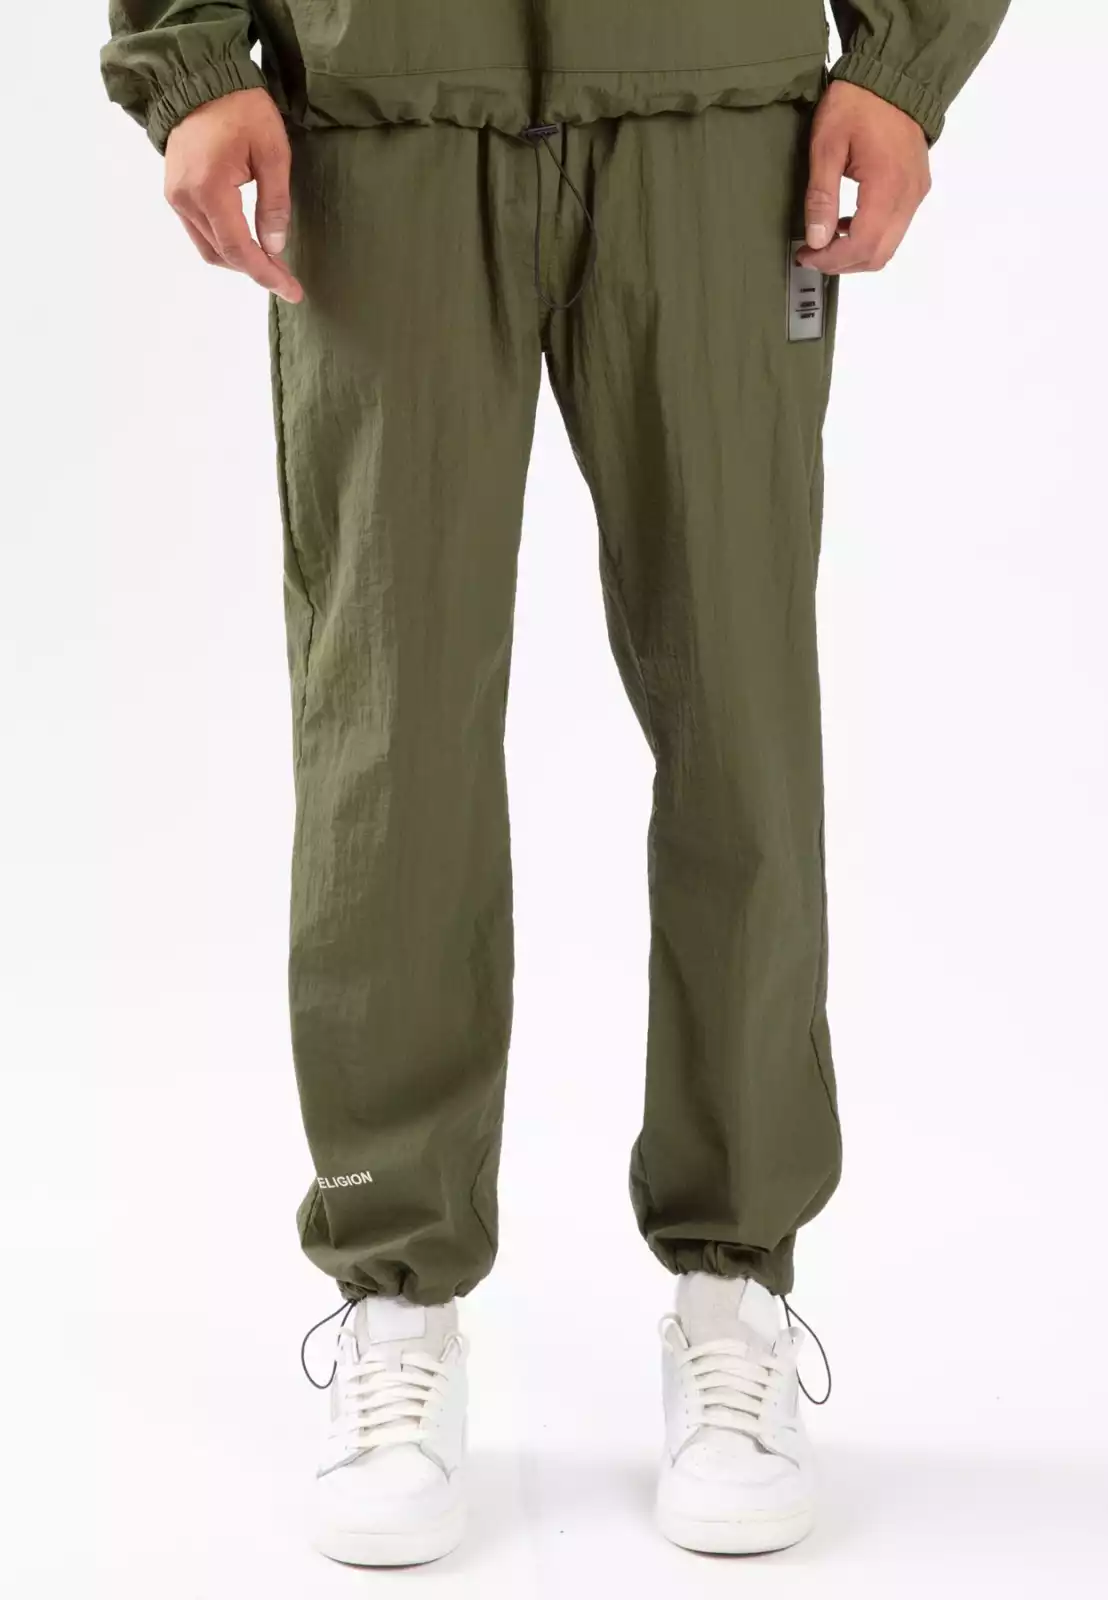 CLOTHING Men's Trousers